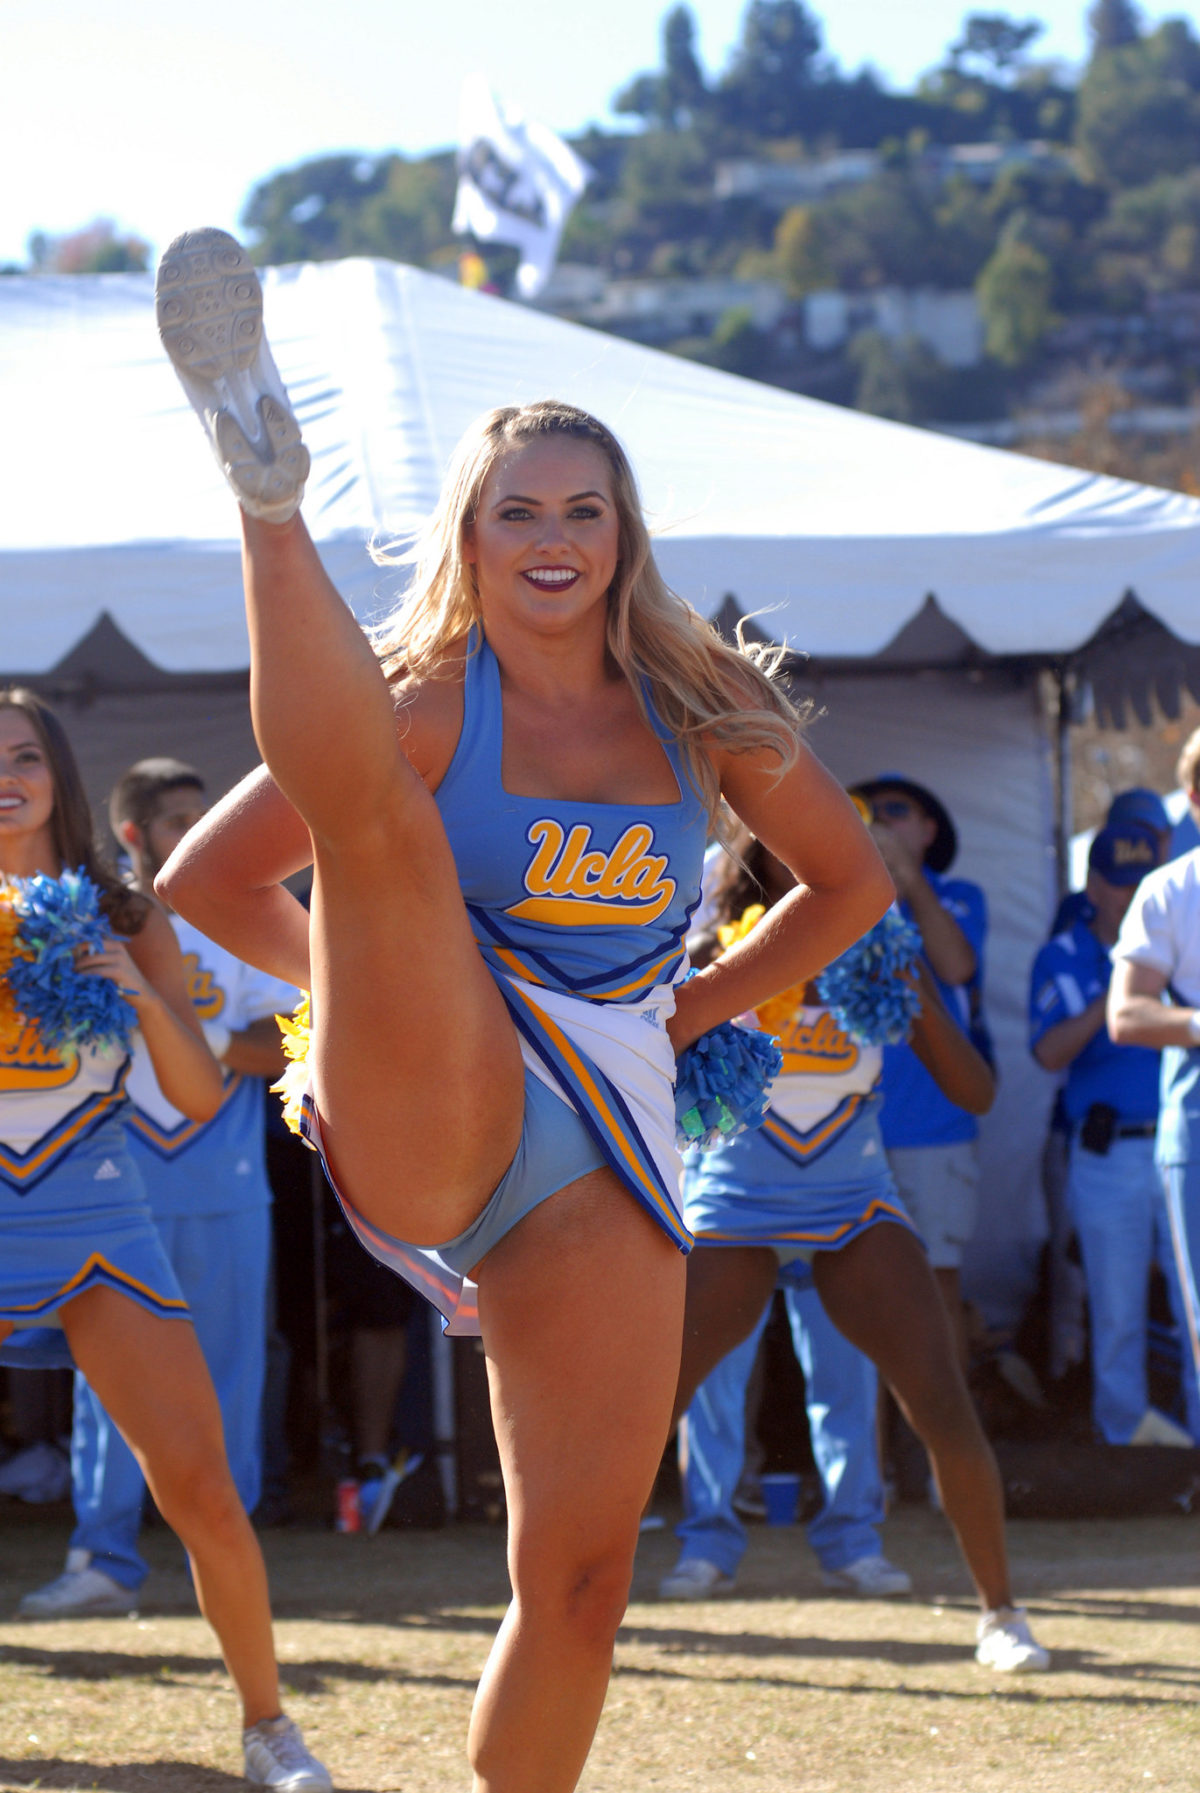 Sexy Pics on Twitter: "A high-kicking cheerleader https://t.co/A6y5YWN...